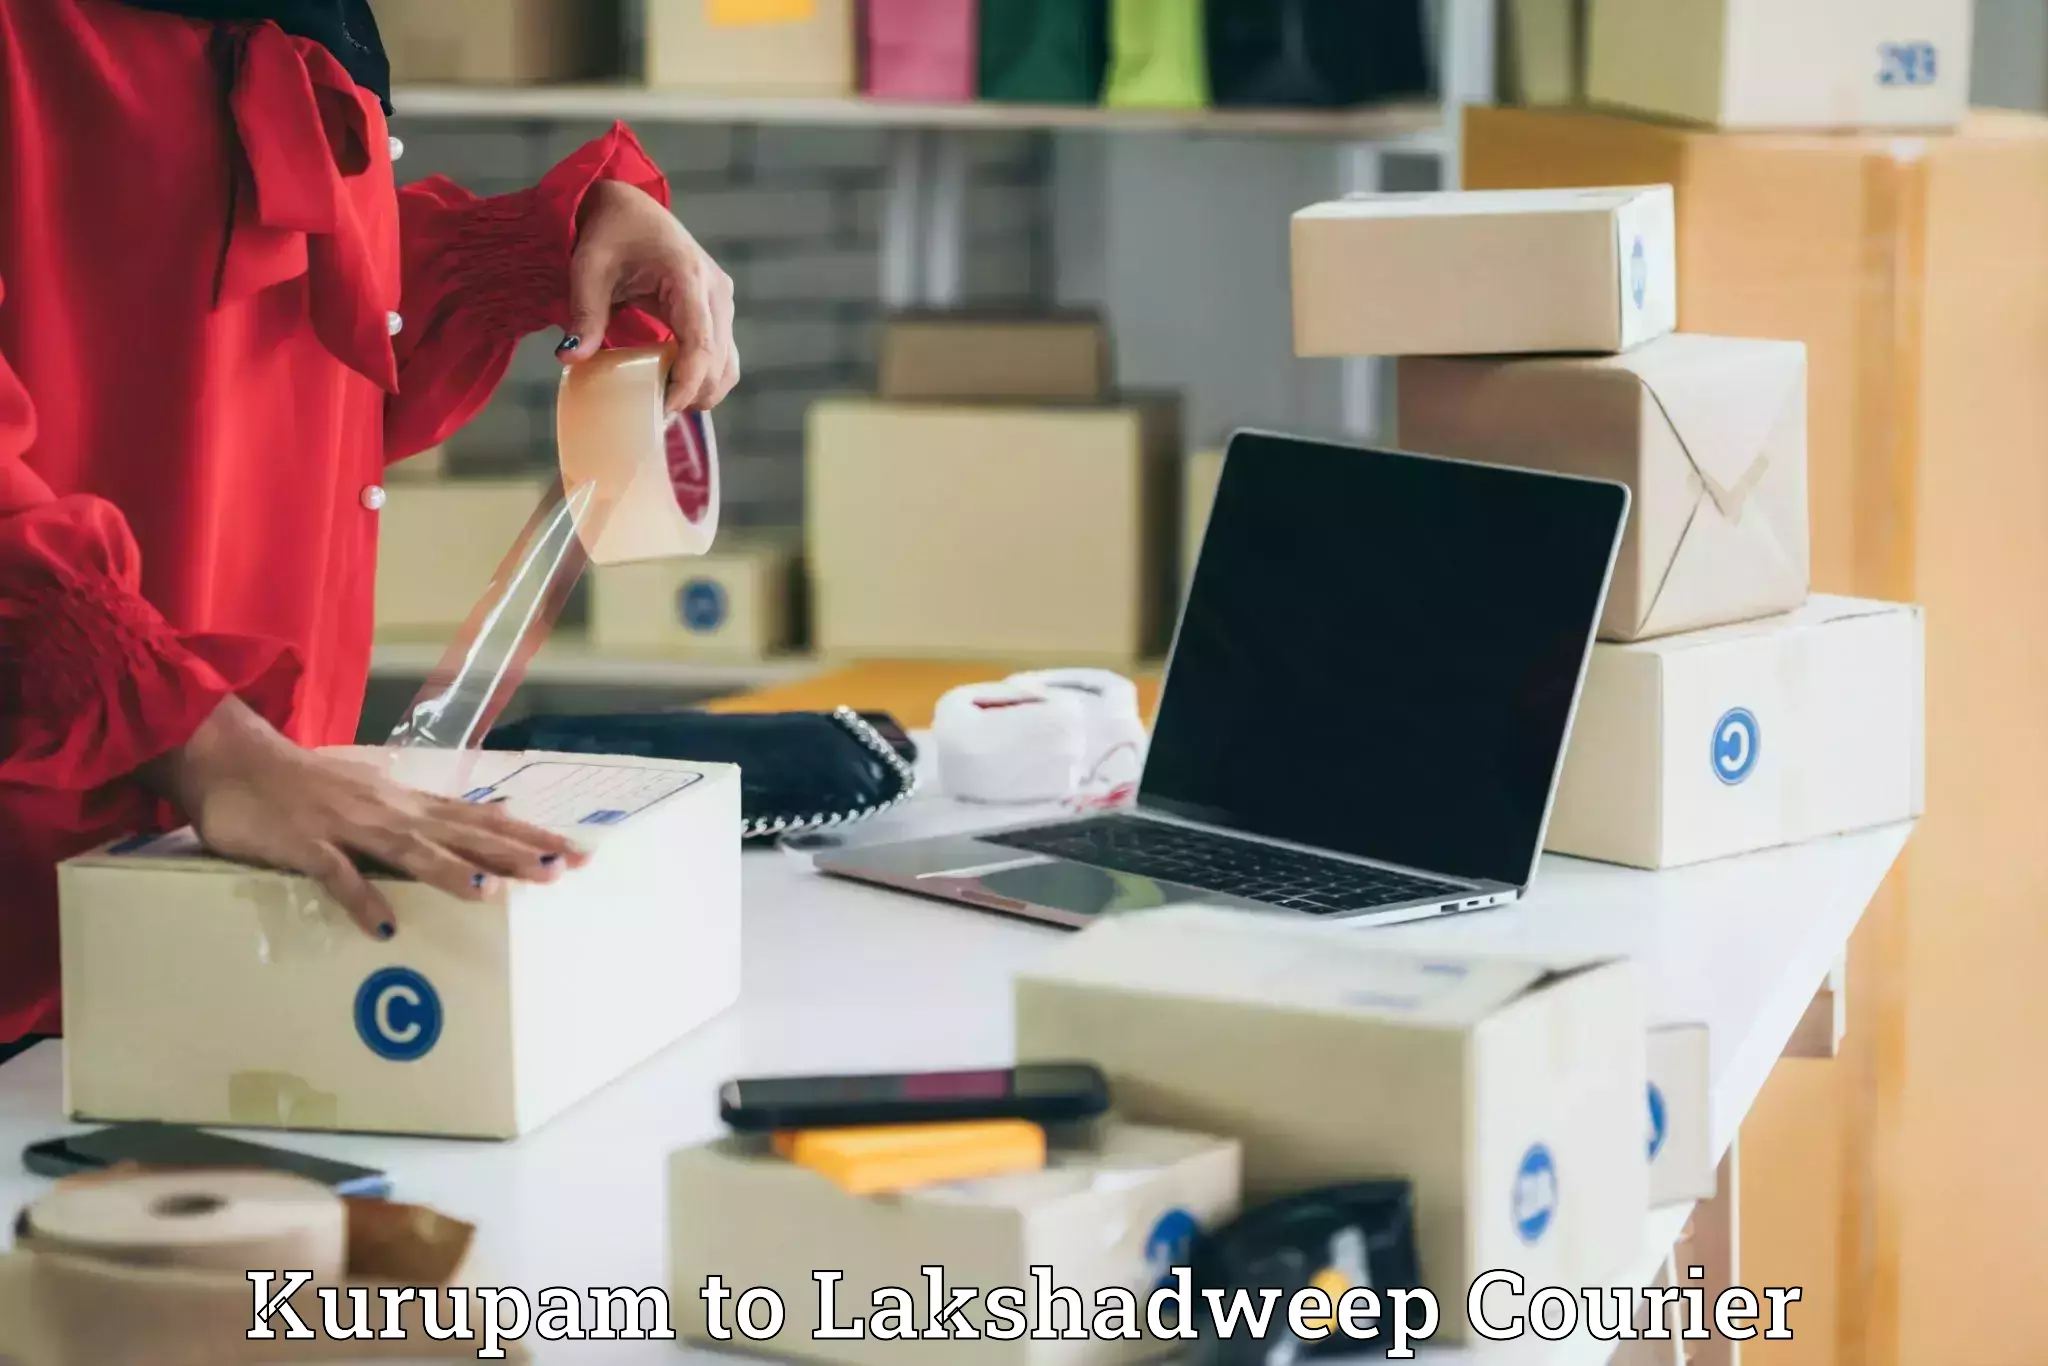 State-of-the-art courier technology Kurupam to Lakshadweep